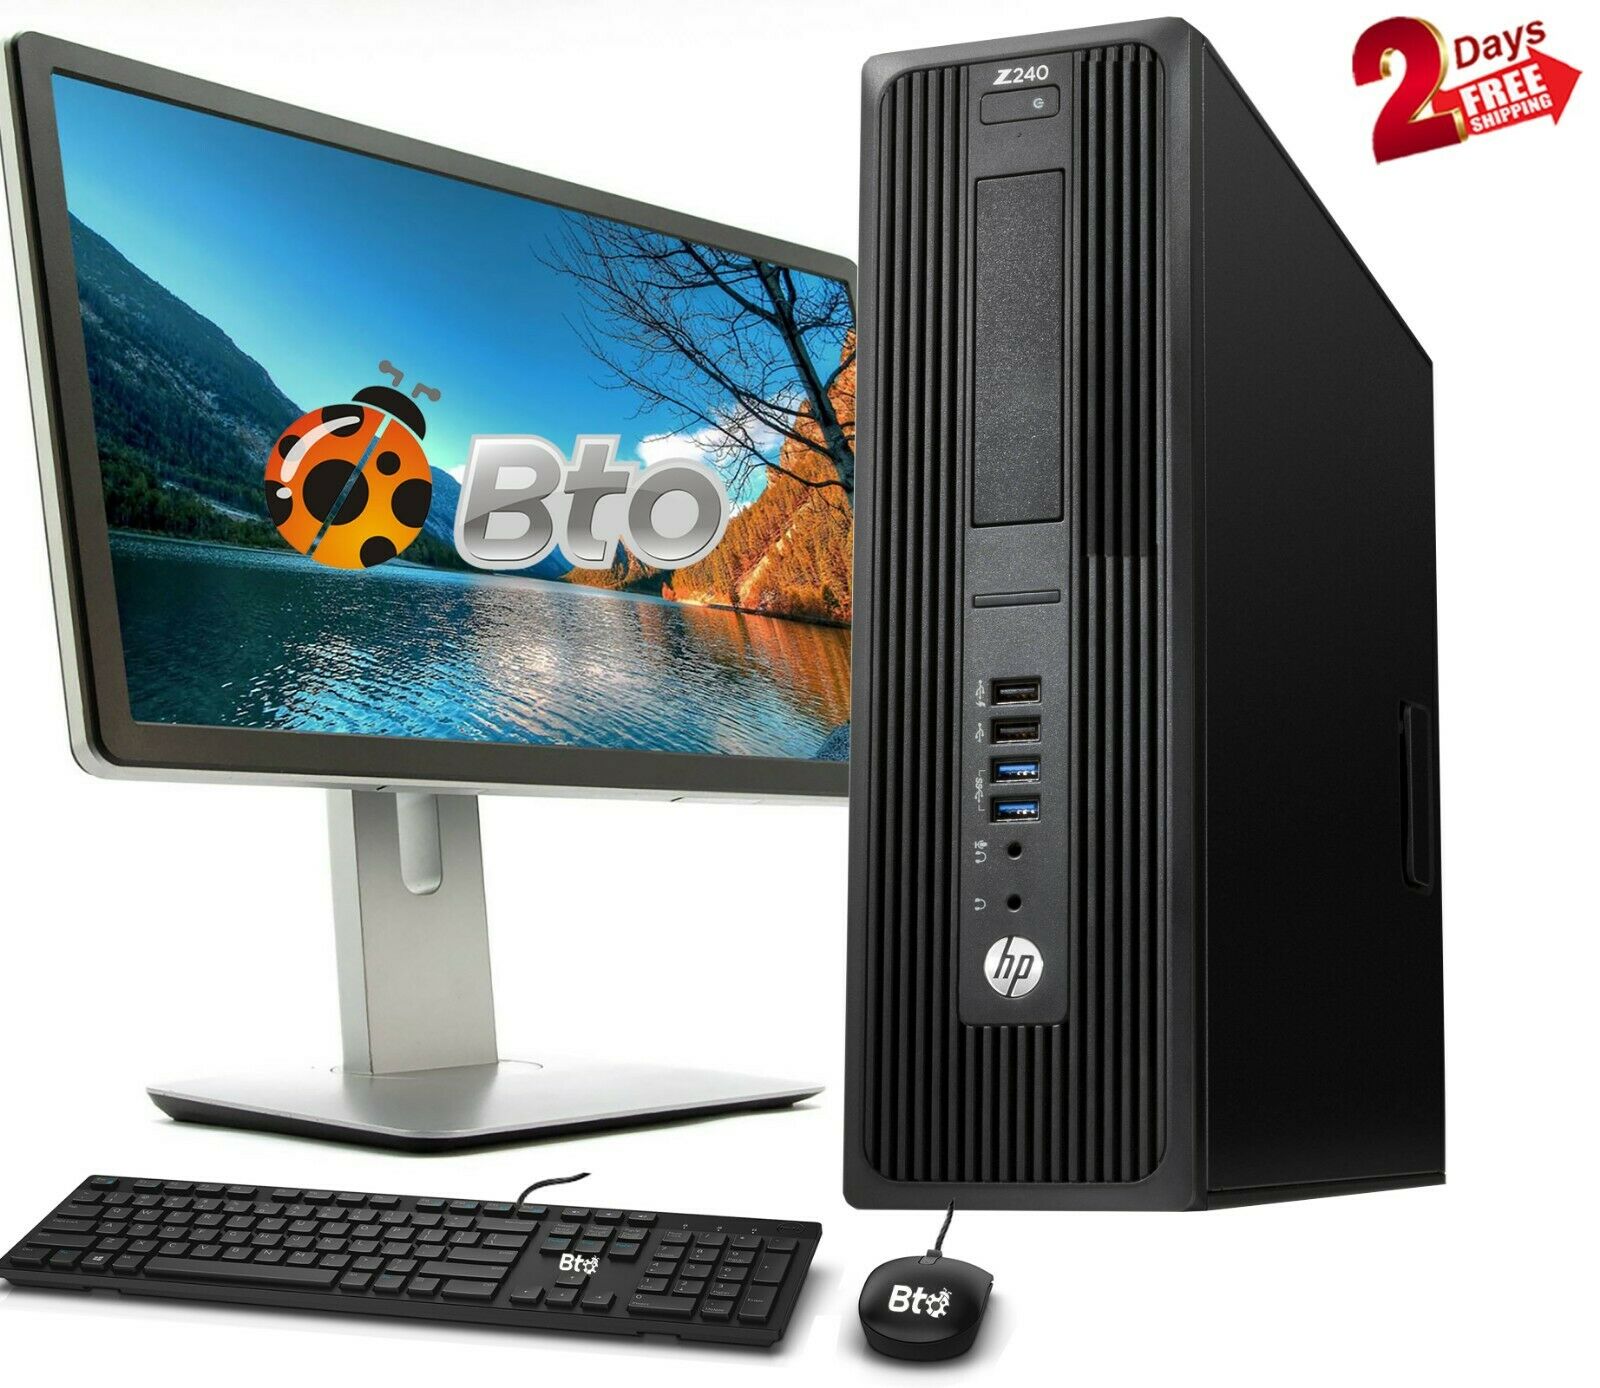 Restored HP Z240 Workstation SFF Computer Core i5 6th 3.4GHz, 8GB Ram, 500GB HDD, New 19" LCD, Keyboard and Mouse, Wi-Fi, Win10 Pro Desktop PC (Refurbished) - image 1 of 9